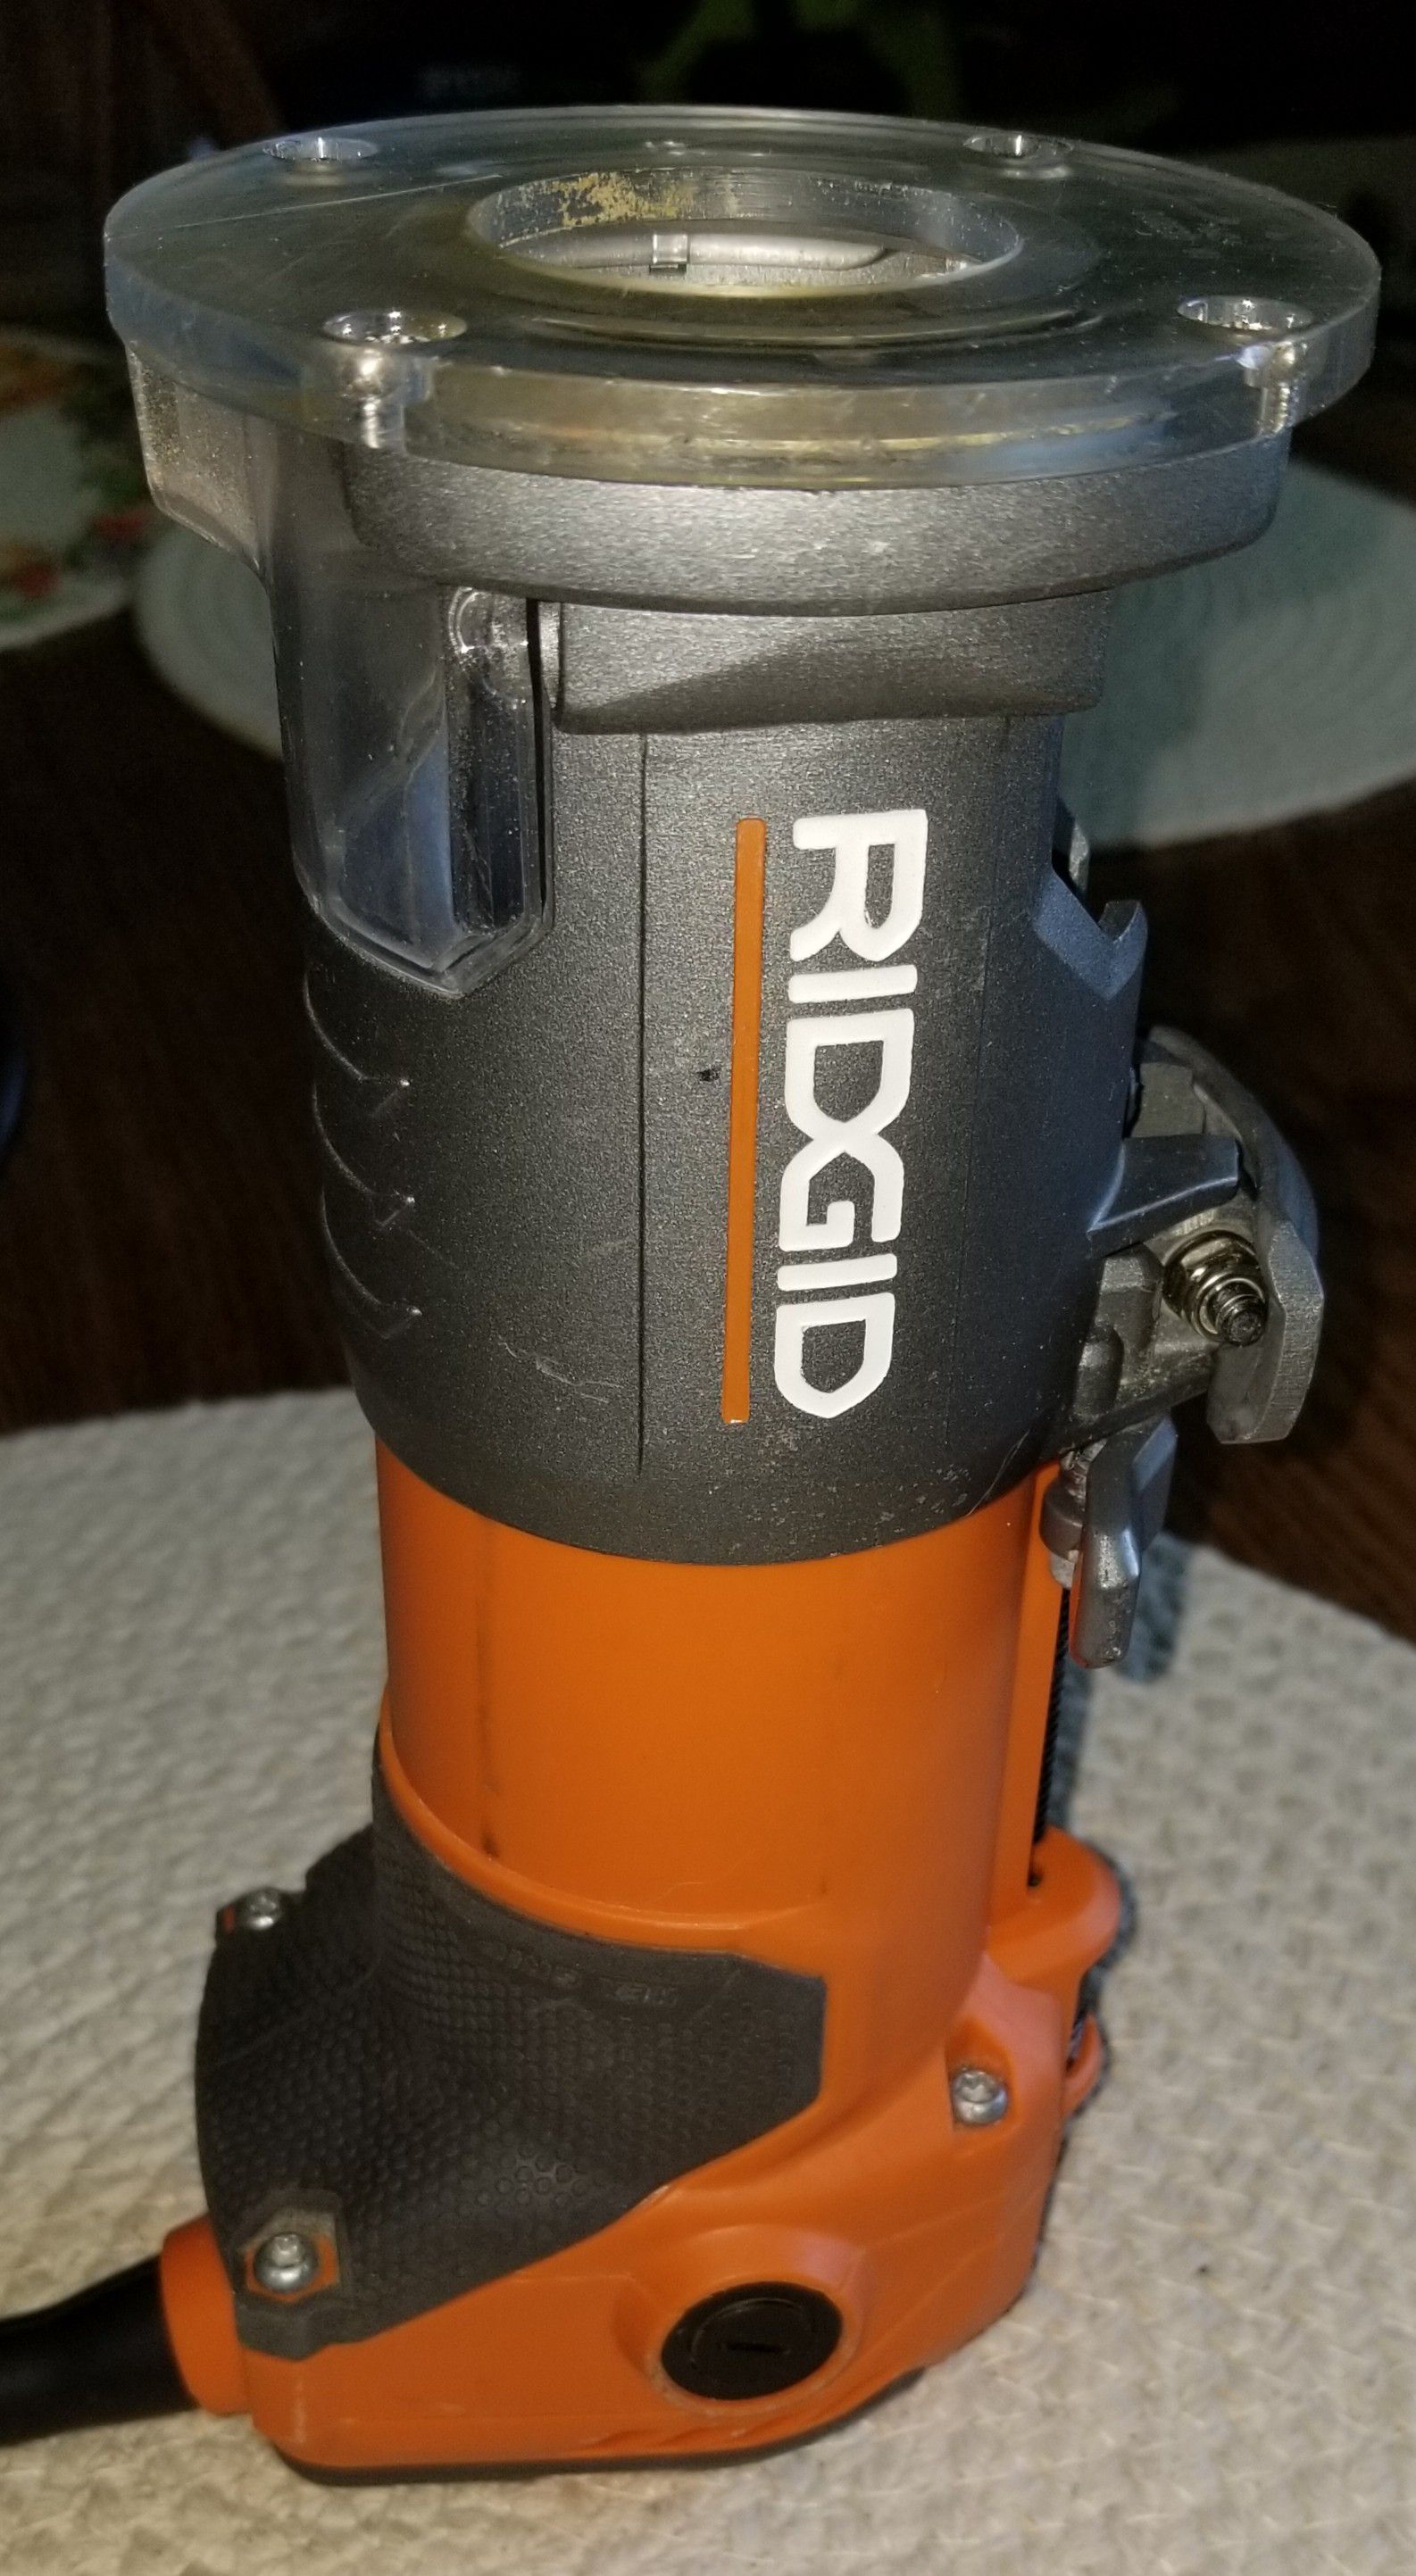 Ridgid 5.5 Amp Corded Compact Fixed-Base Router R2401 Palm Router